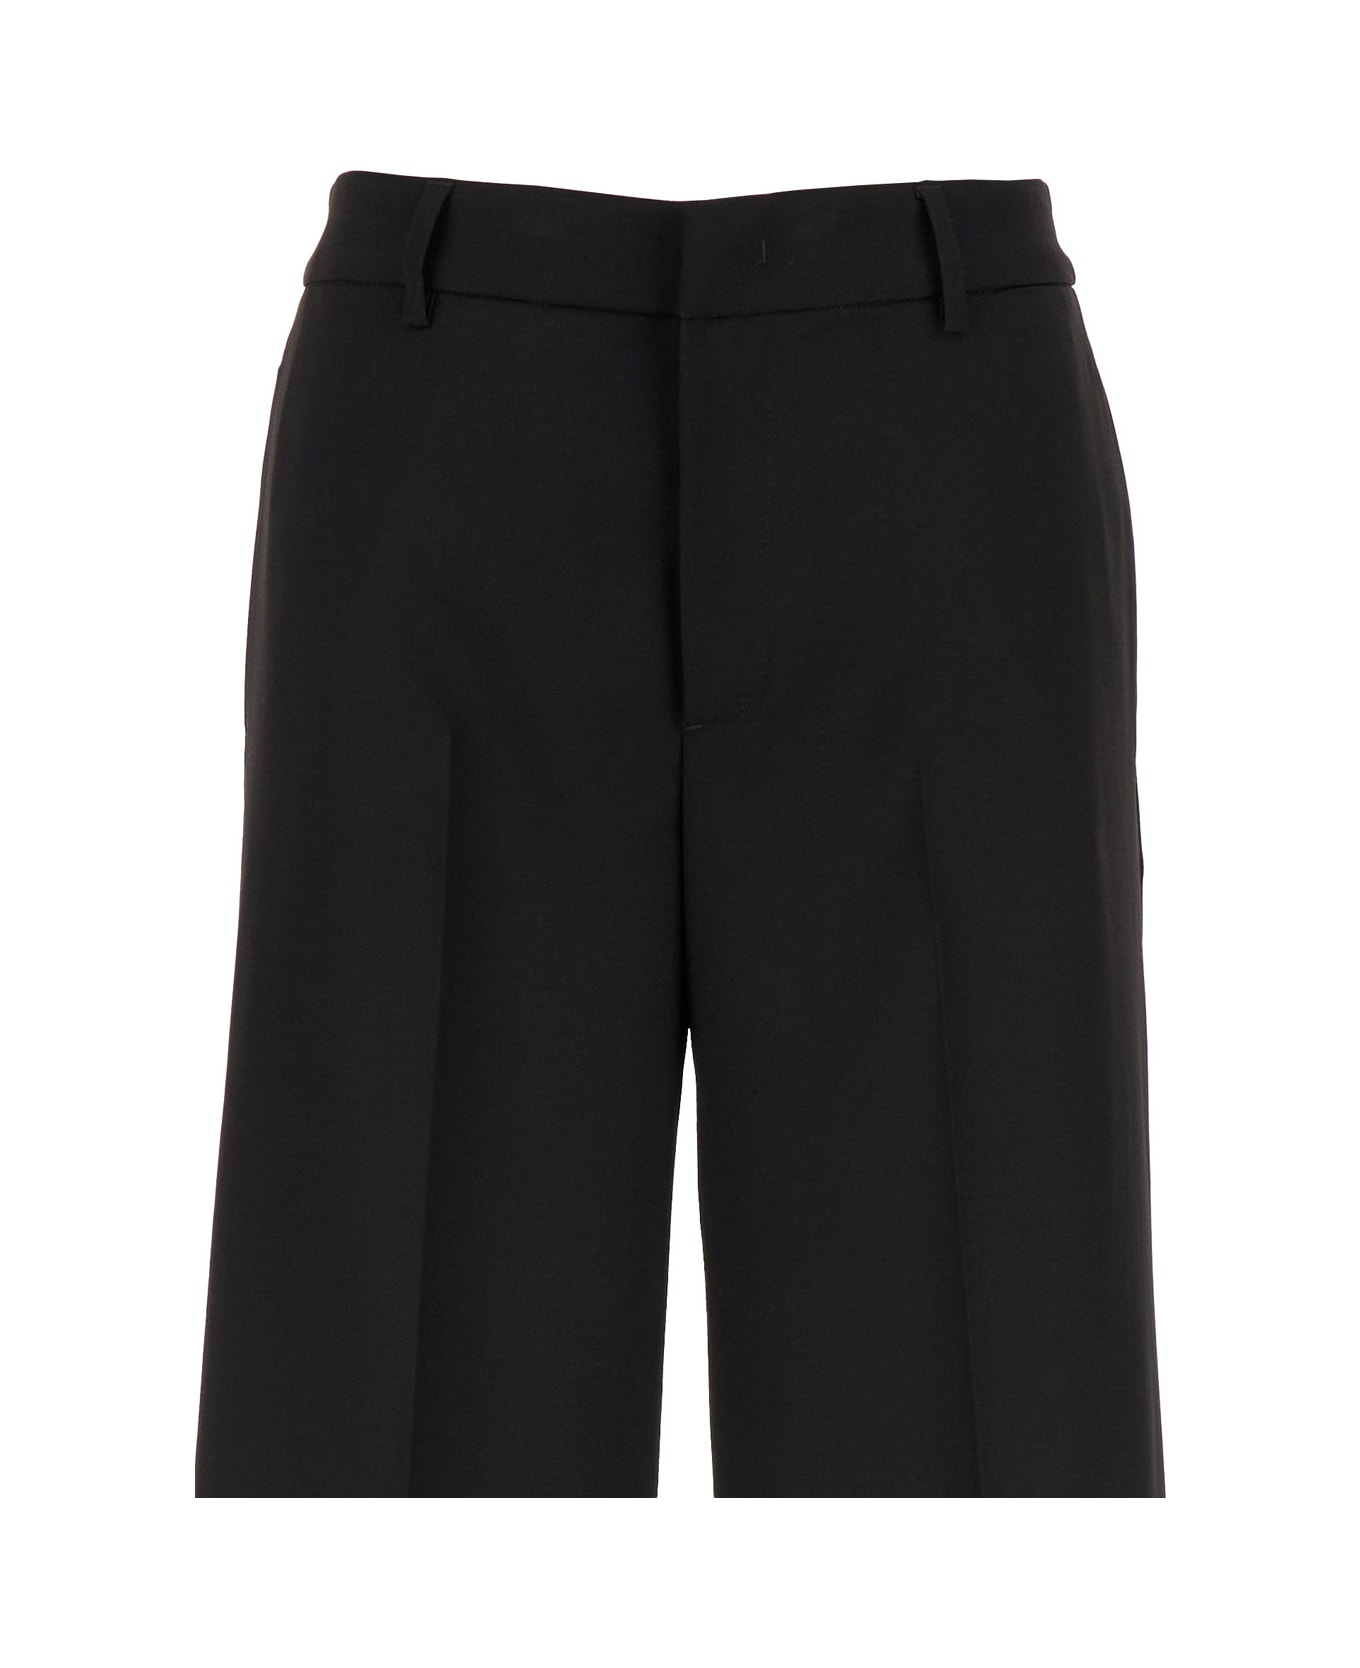 PT Torino Tailored 'lorenza' High Waisted Black Trousers In Technical Fabric Woman - Black ボトムス